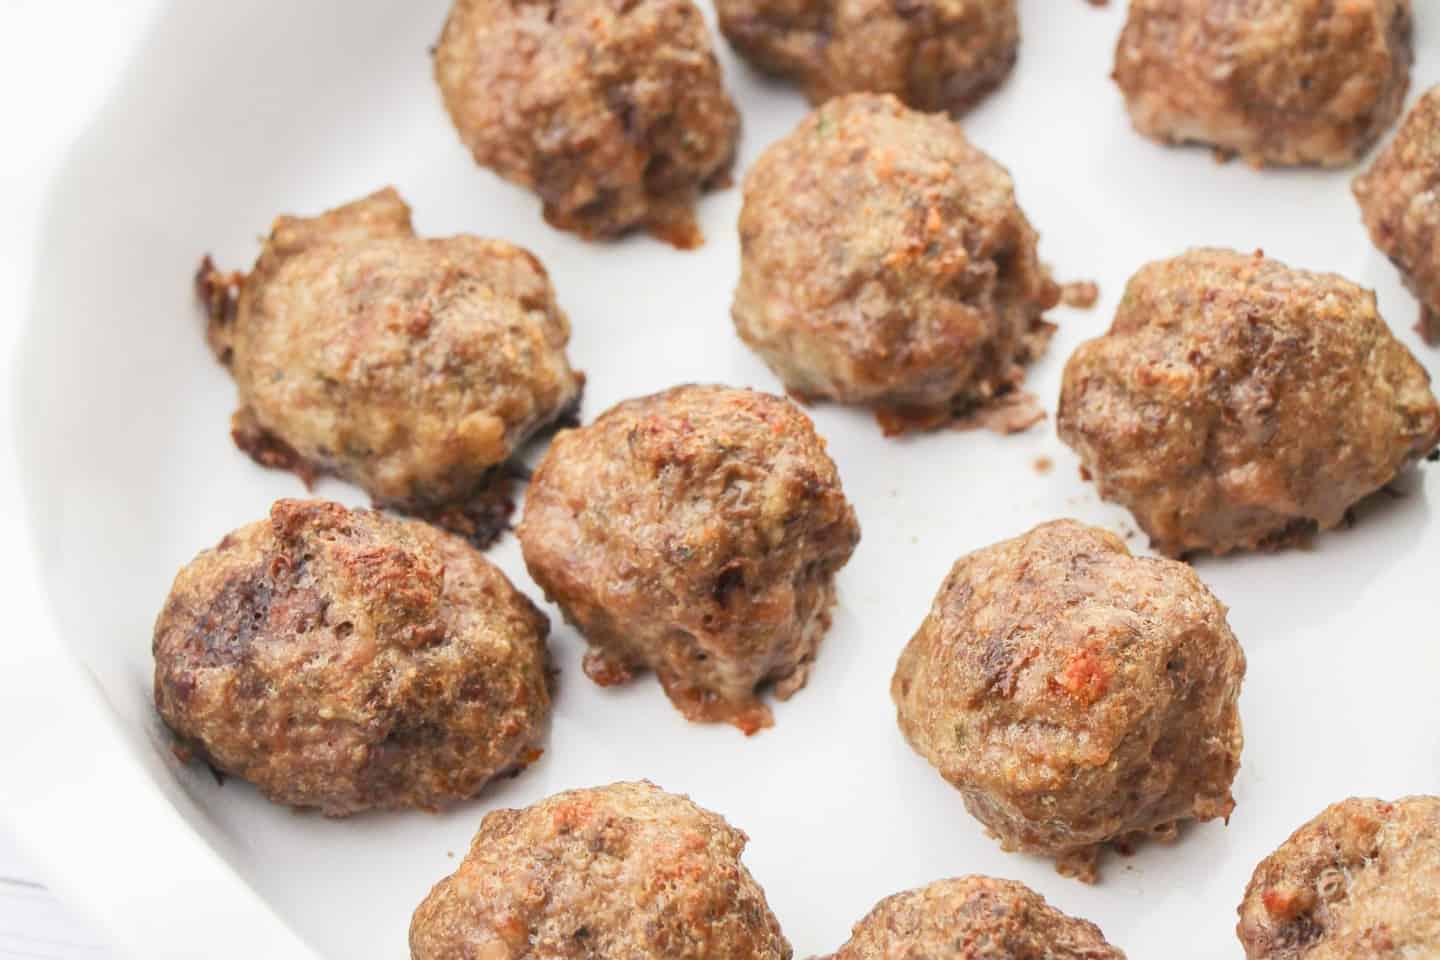 Place the meatballs 1 inch apart on a parchment-lined baking sheet and bake them for 18 minutes.